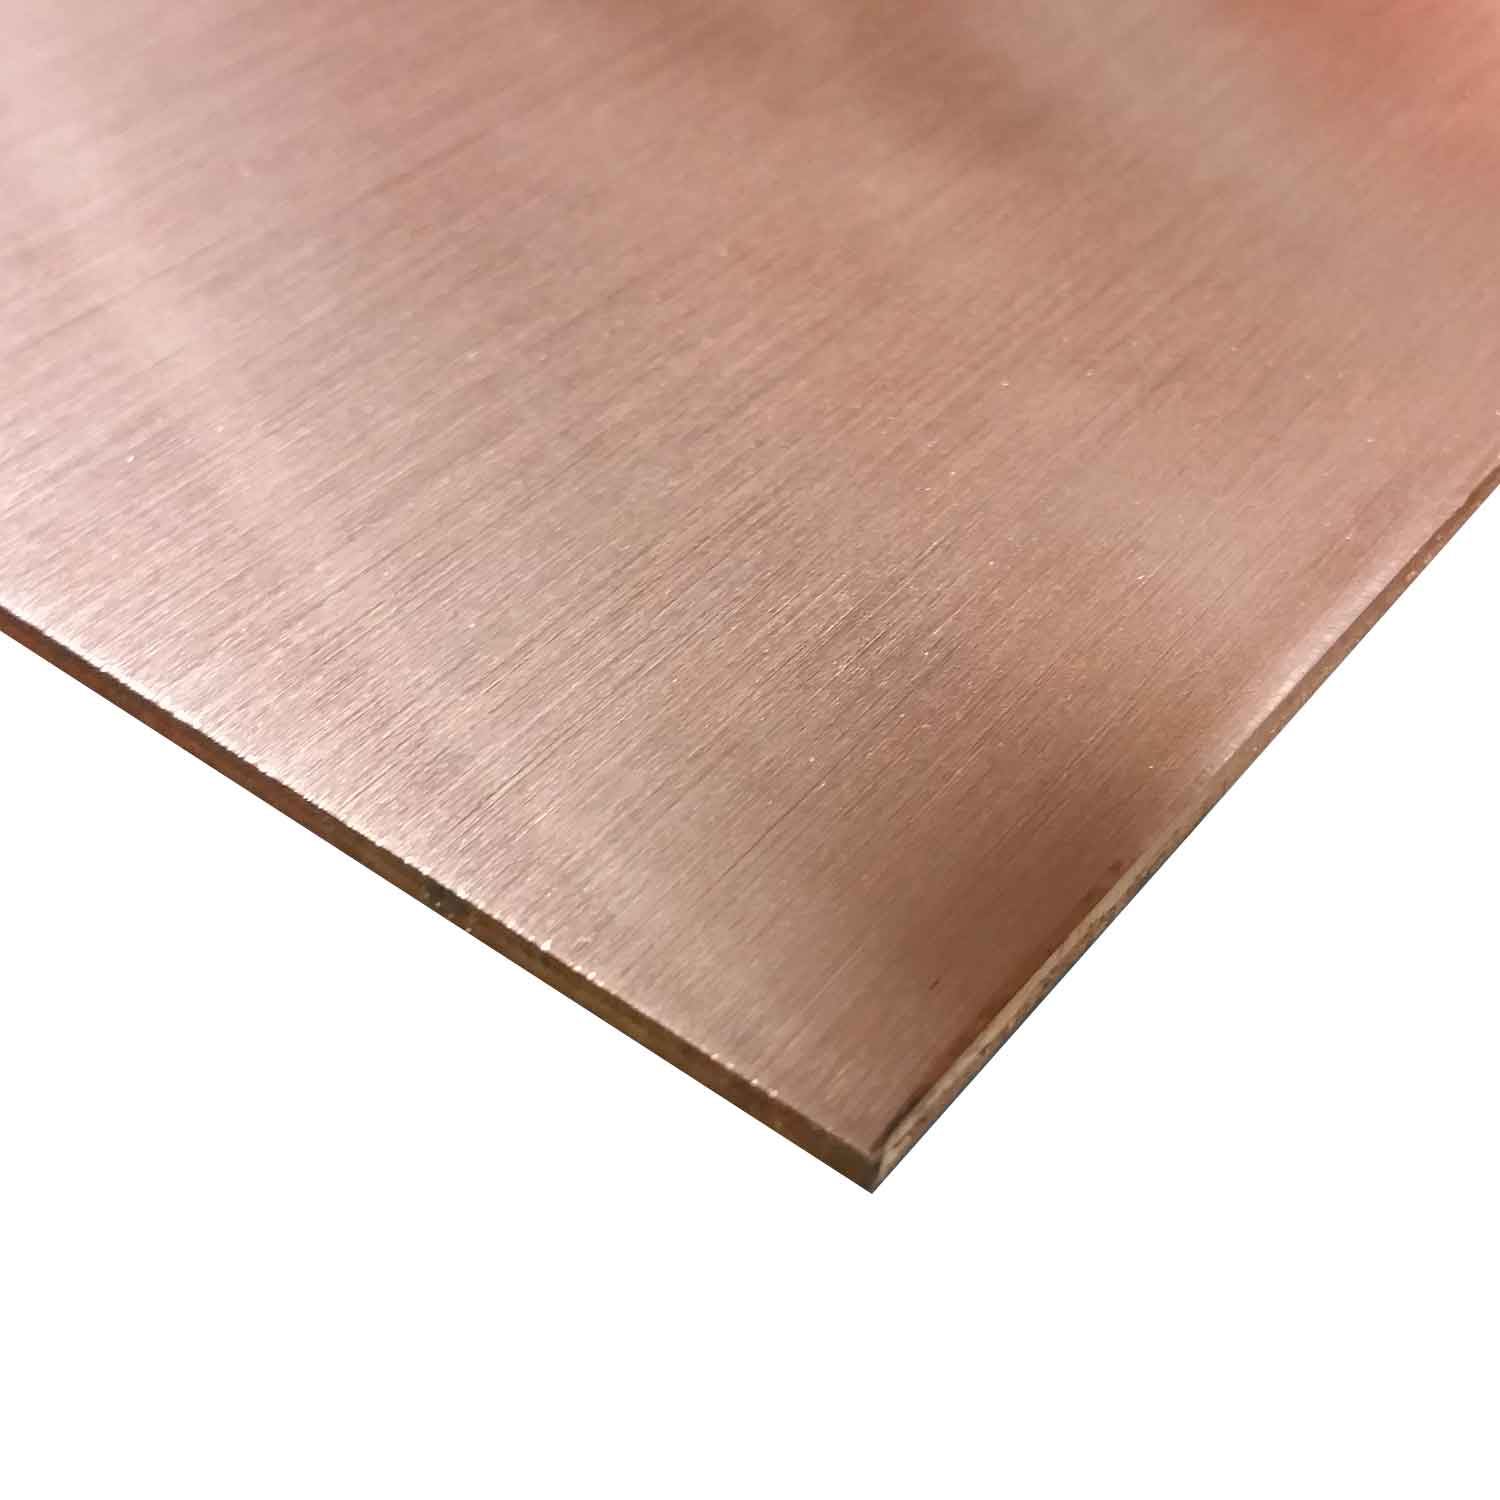 High Quality Pure Copper Plate 99.99% Copper Sheet From Gangya Metal 